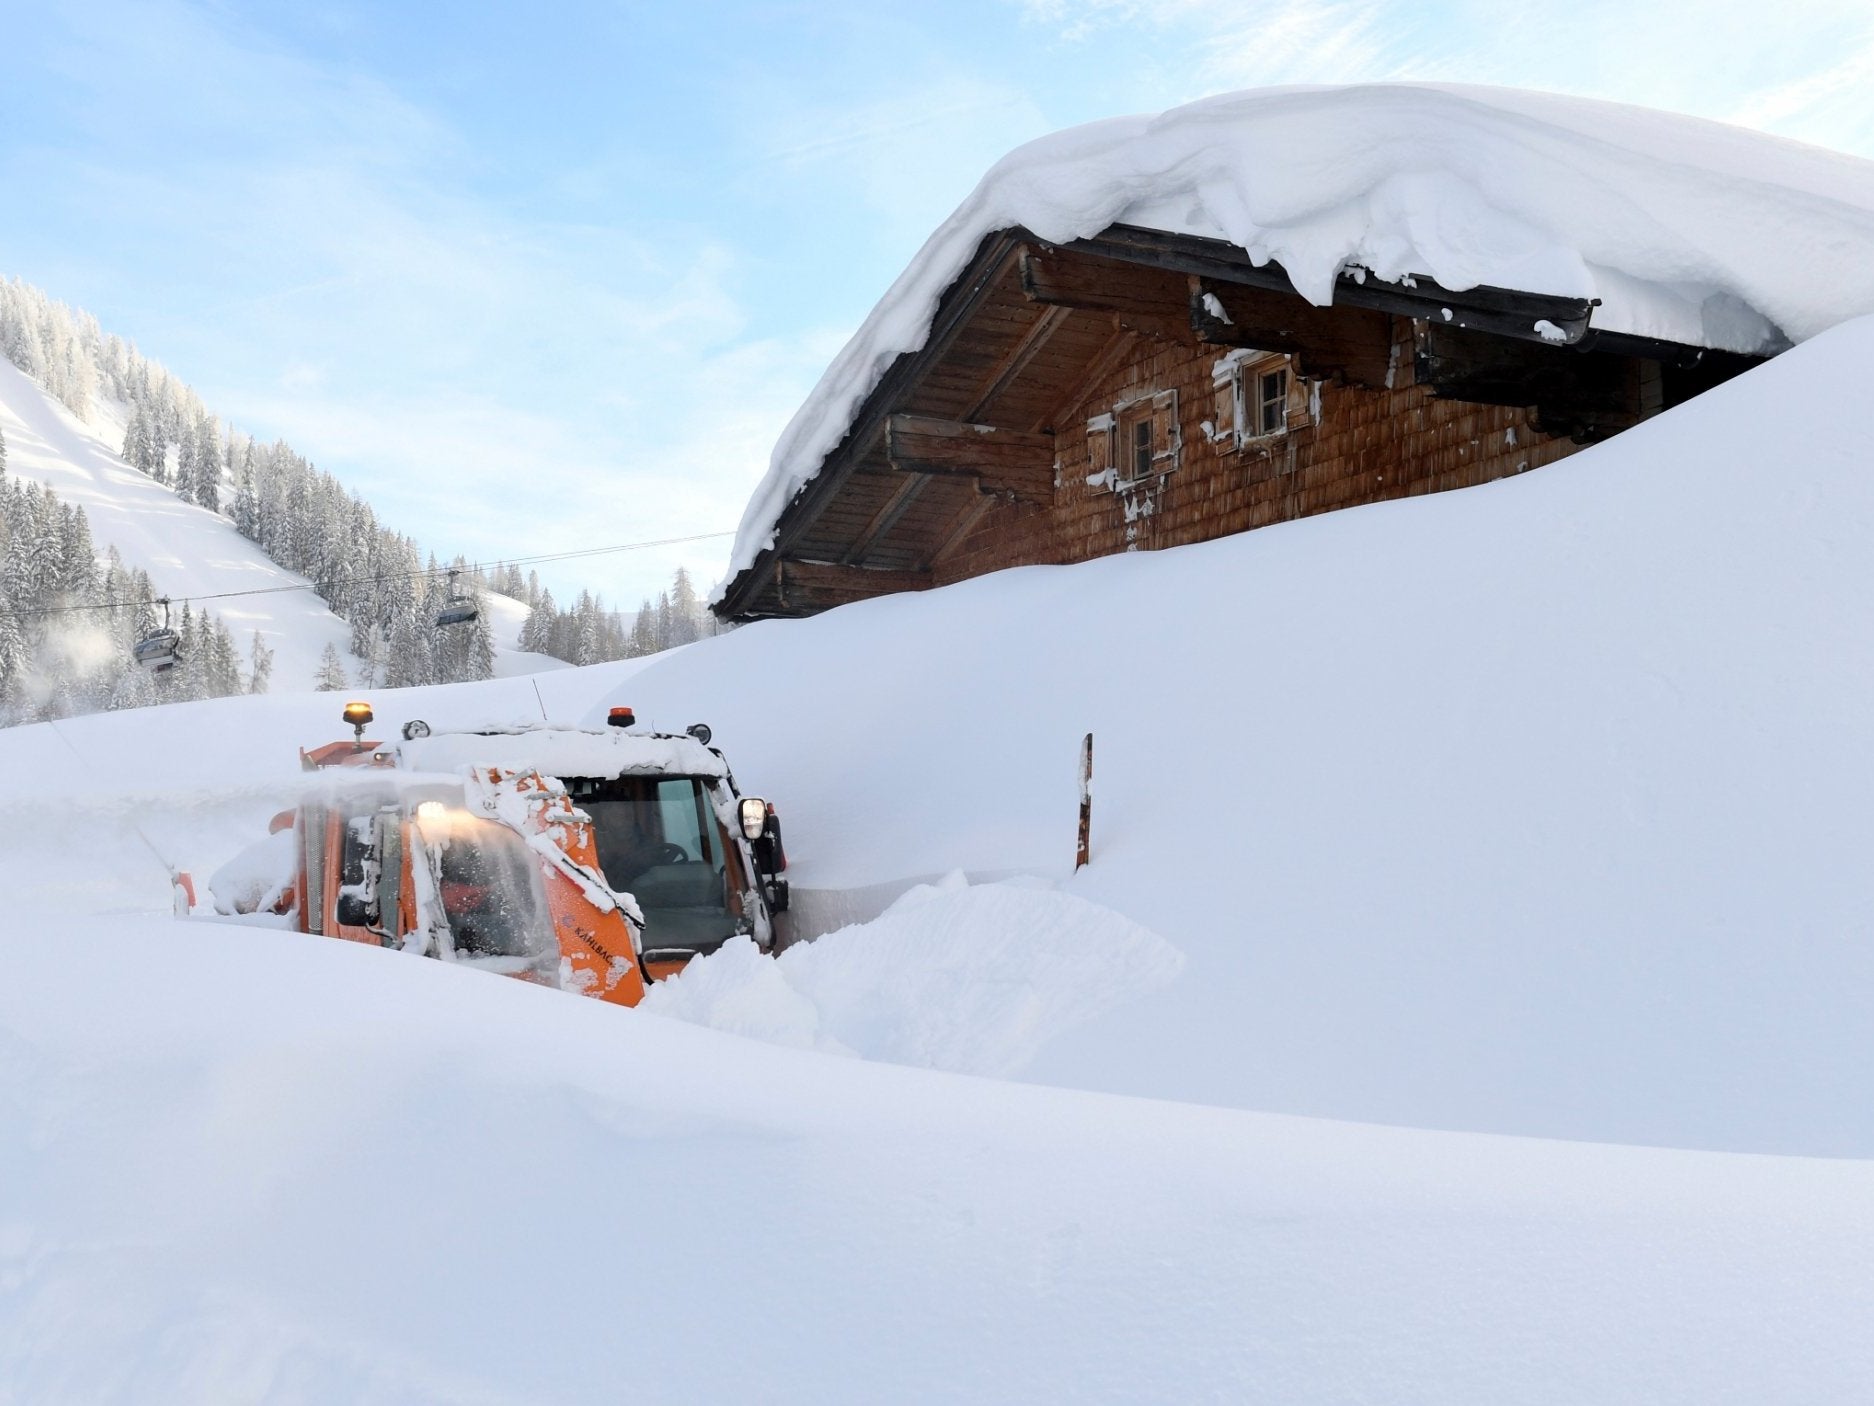 An excavator clears snows in the Austrian Alps